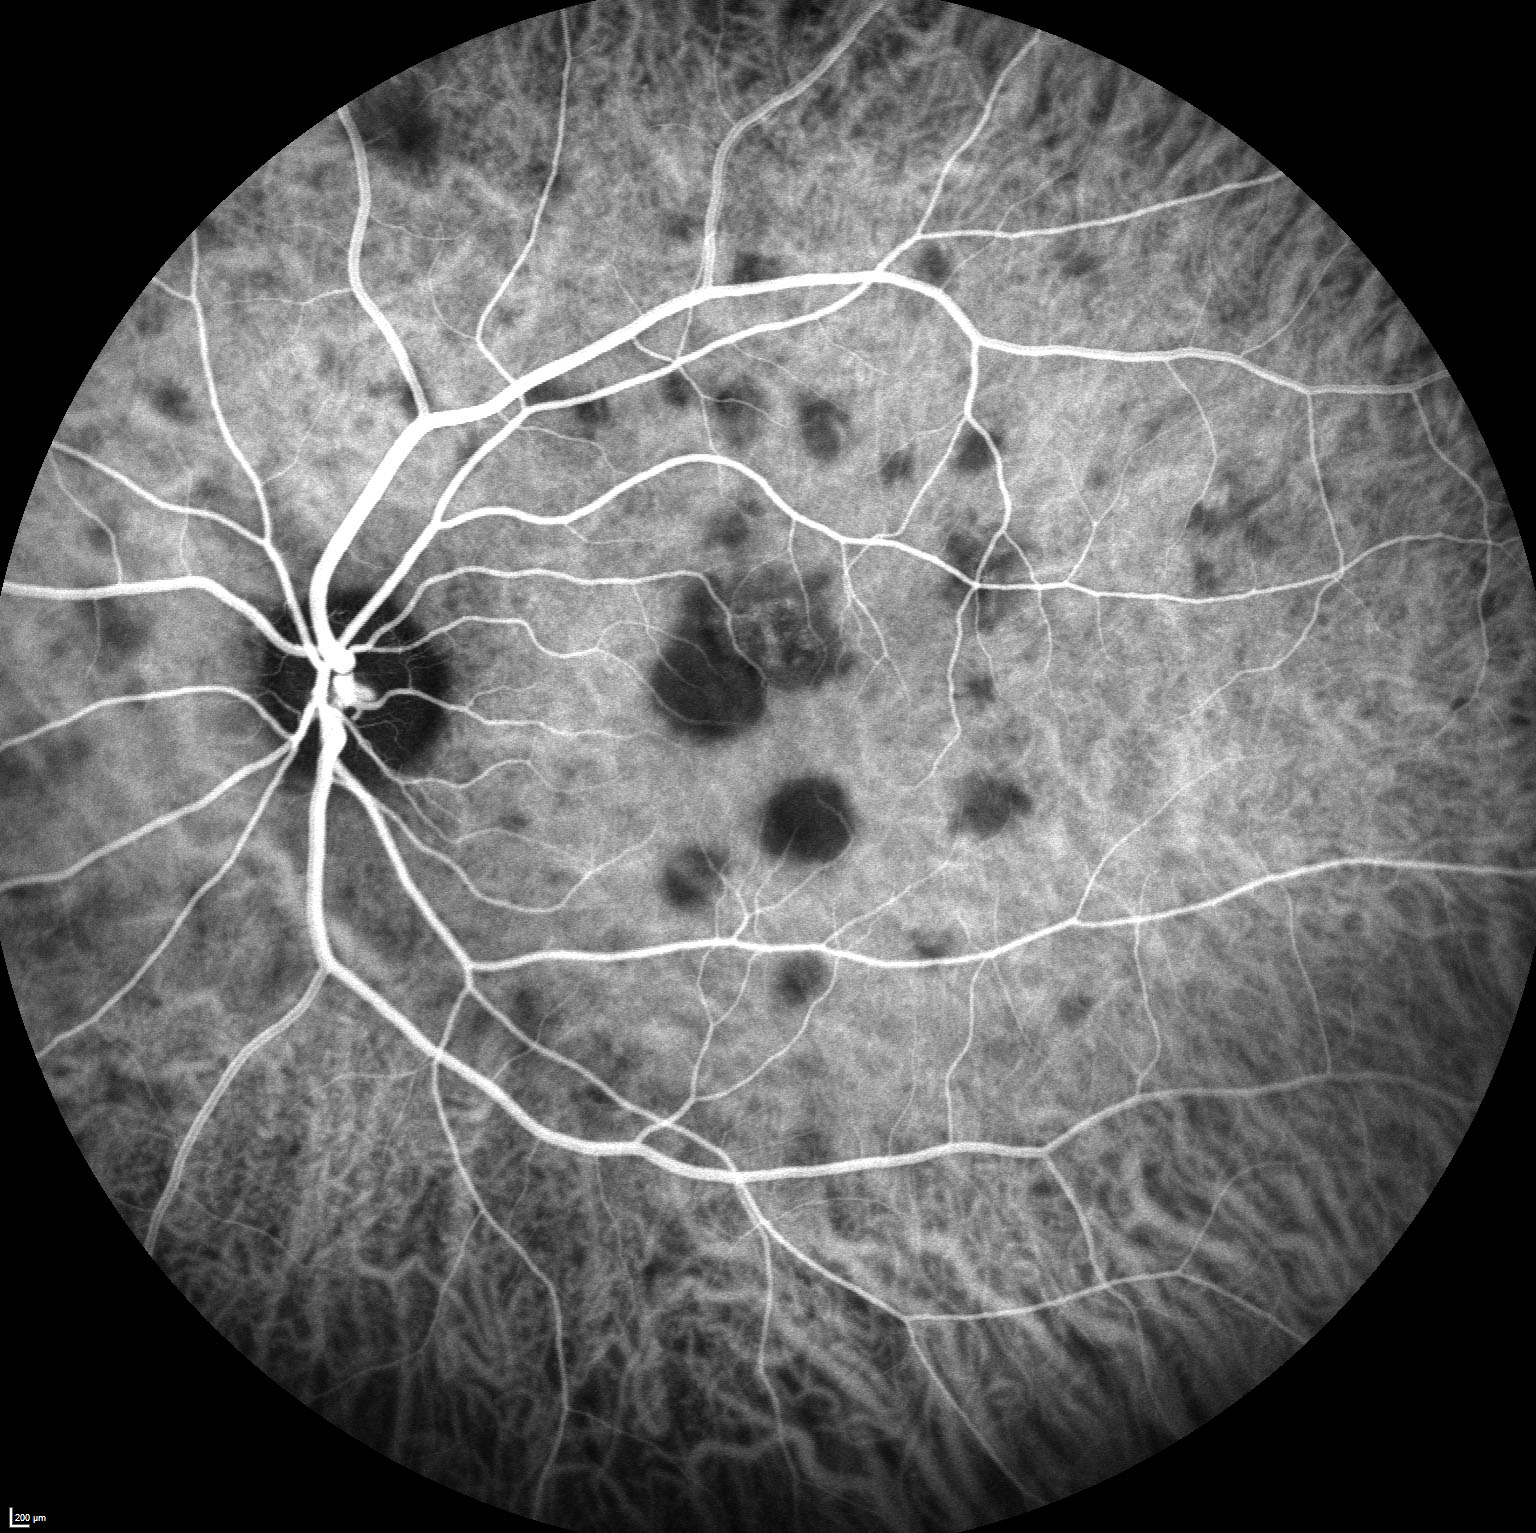 Figure 9.9.3 Acute Posterior Multifocal Placoid Pigment Epitheliopathy (APMPPE)